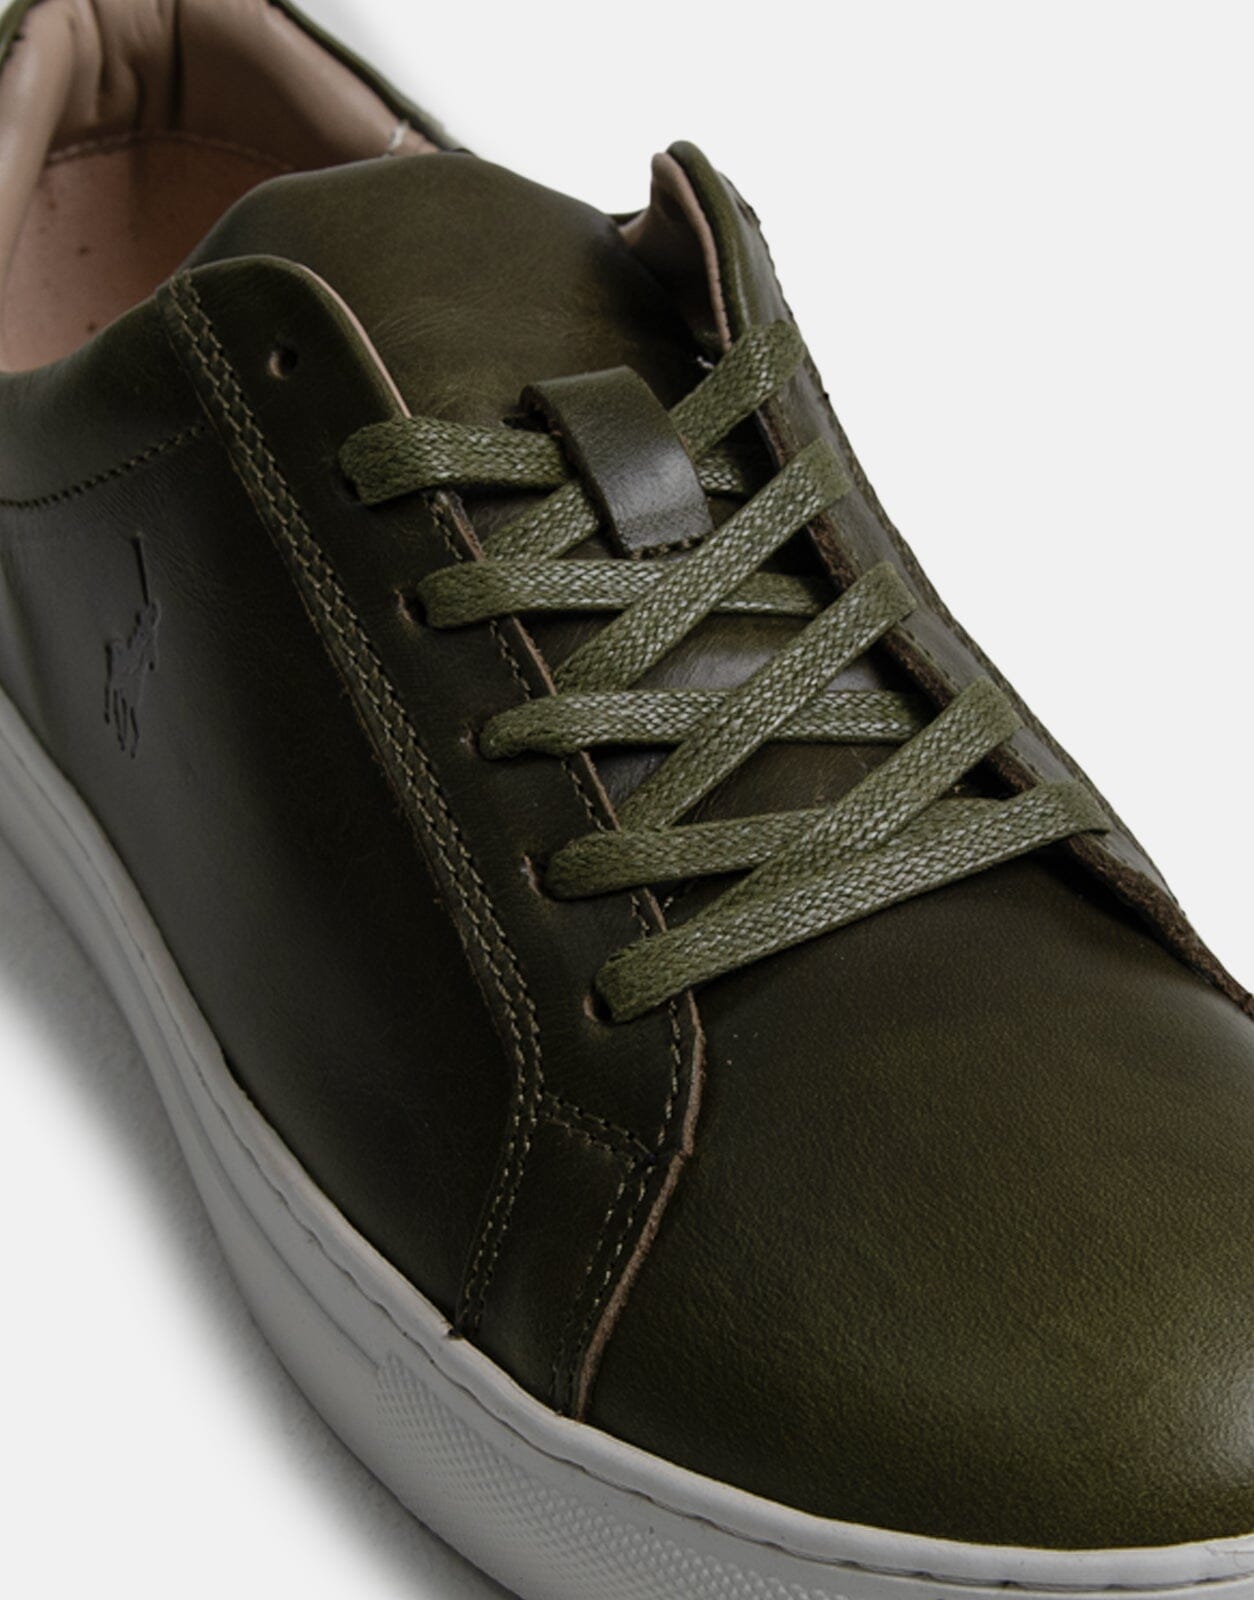 Polo Classic Leather Olive Sneakers - Subwear